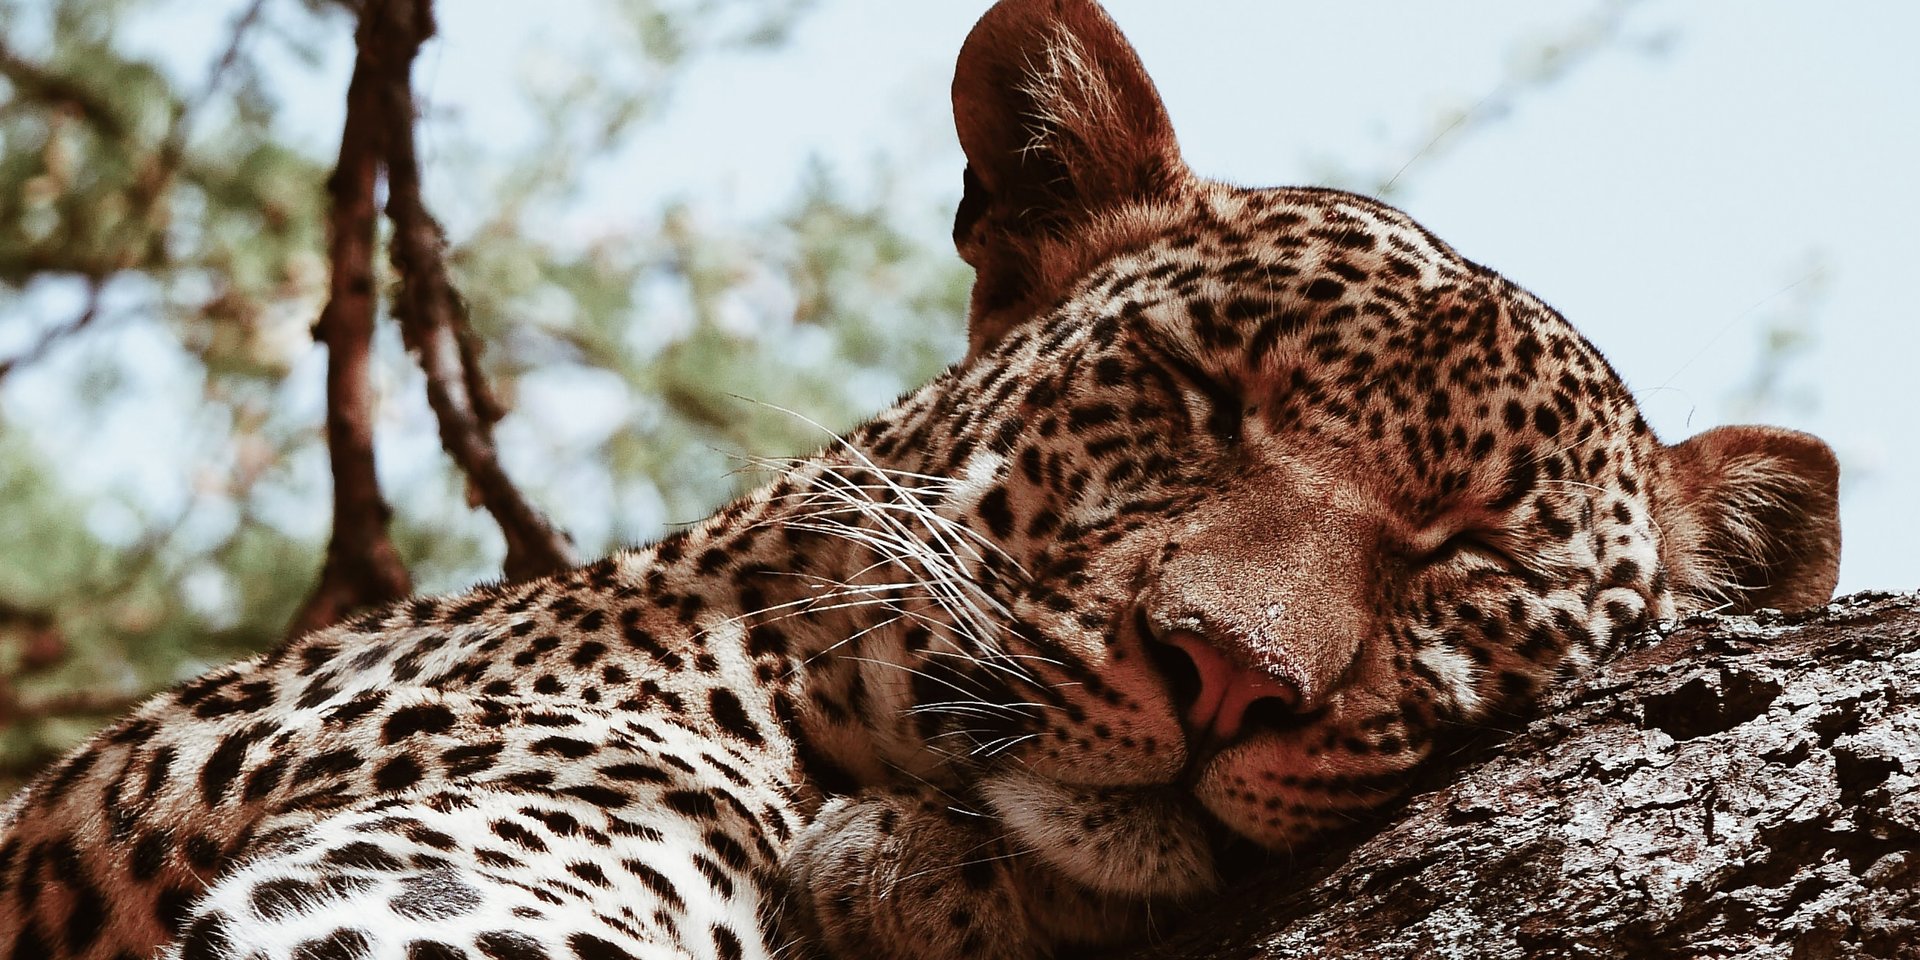 spotted leopard in a tree